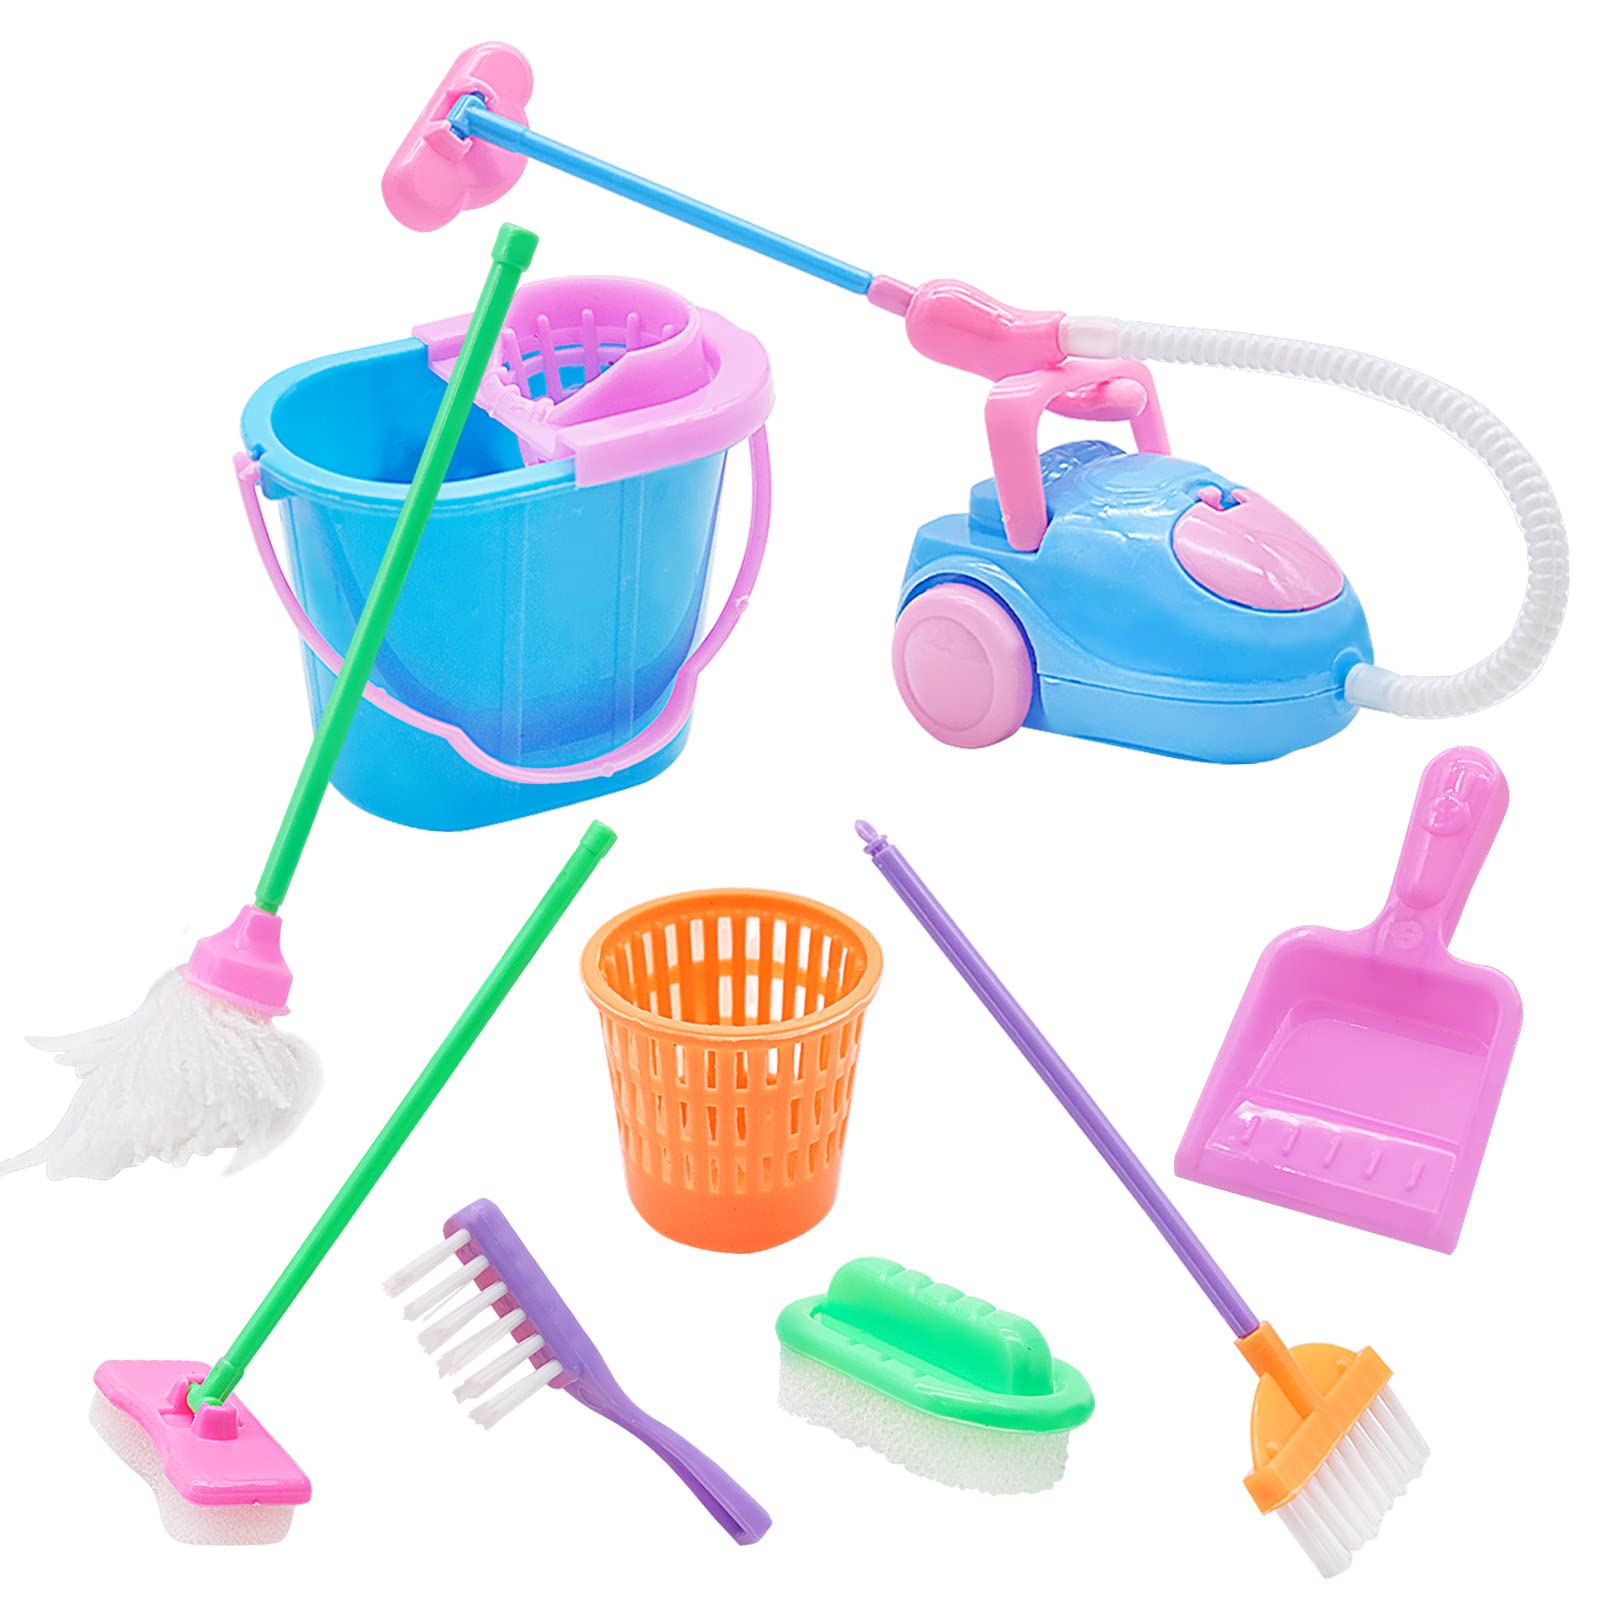 9 Pieces Miniature Dollhouse Cleaning Supplies, Mini Mop, Dustpan, Brush, Broom and Bucket Housework Tools, Doll House Accessories Pretend Play Decoration